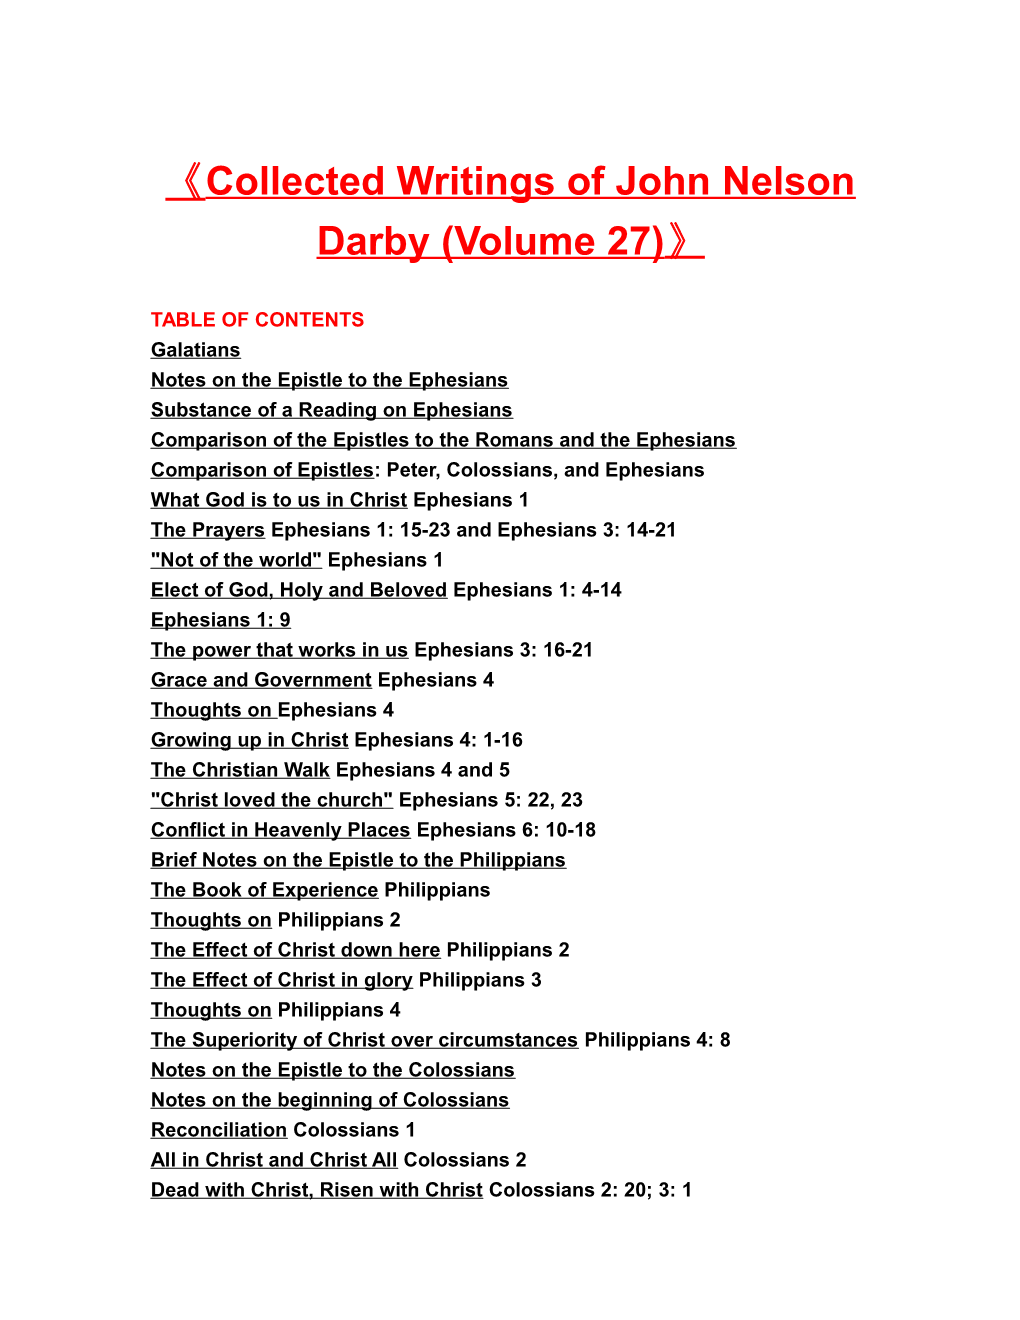 Collected Writings of John Nelson Darby (Volume 27)